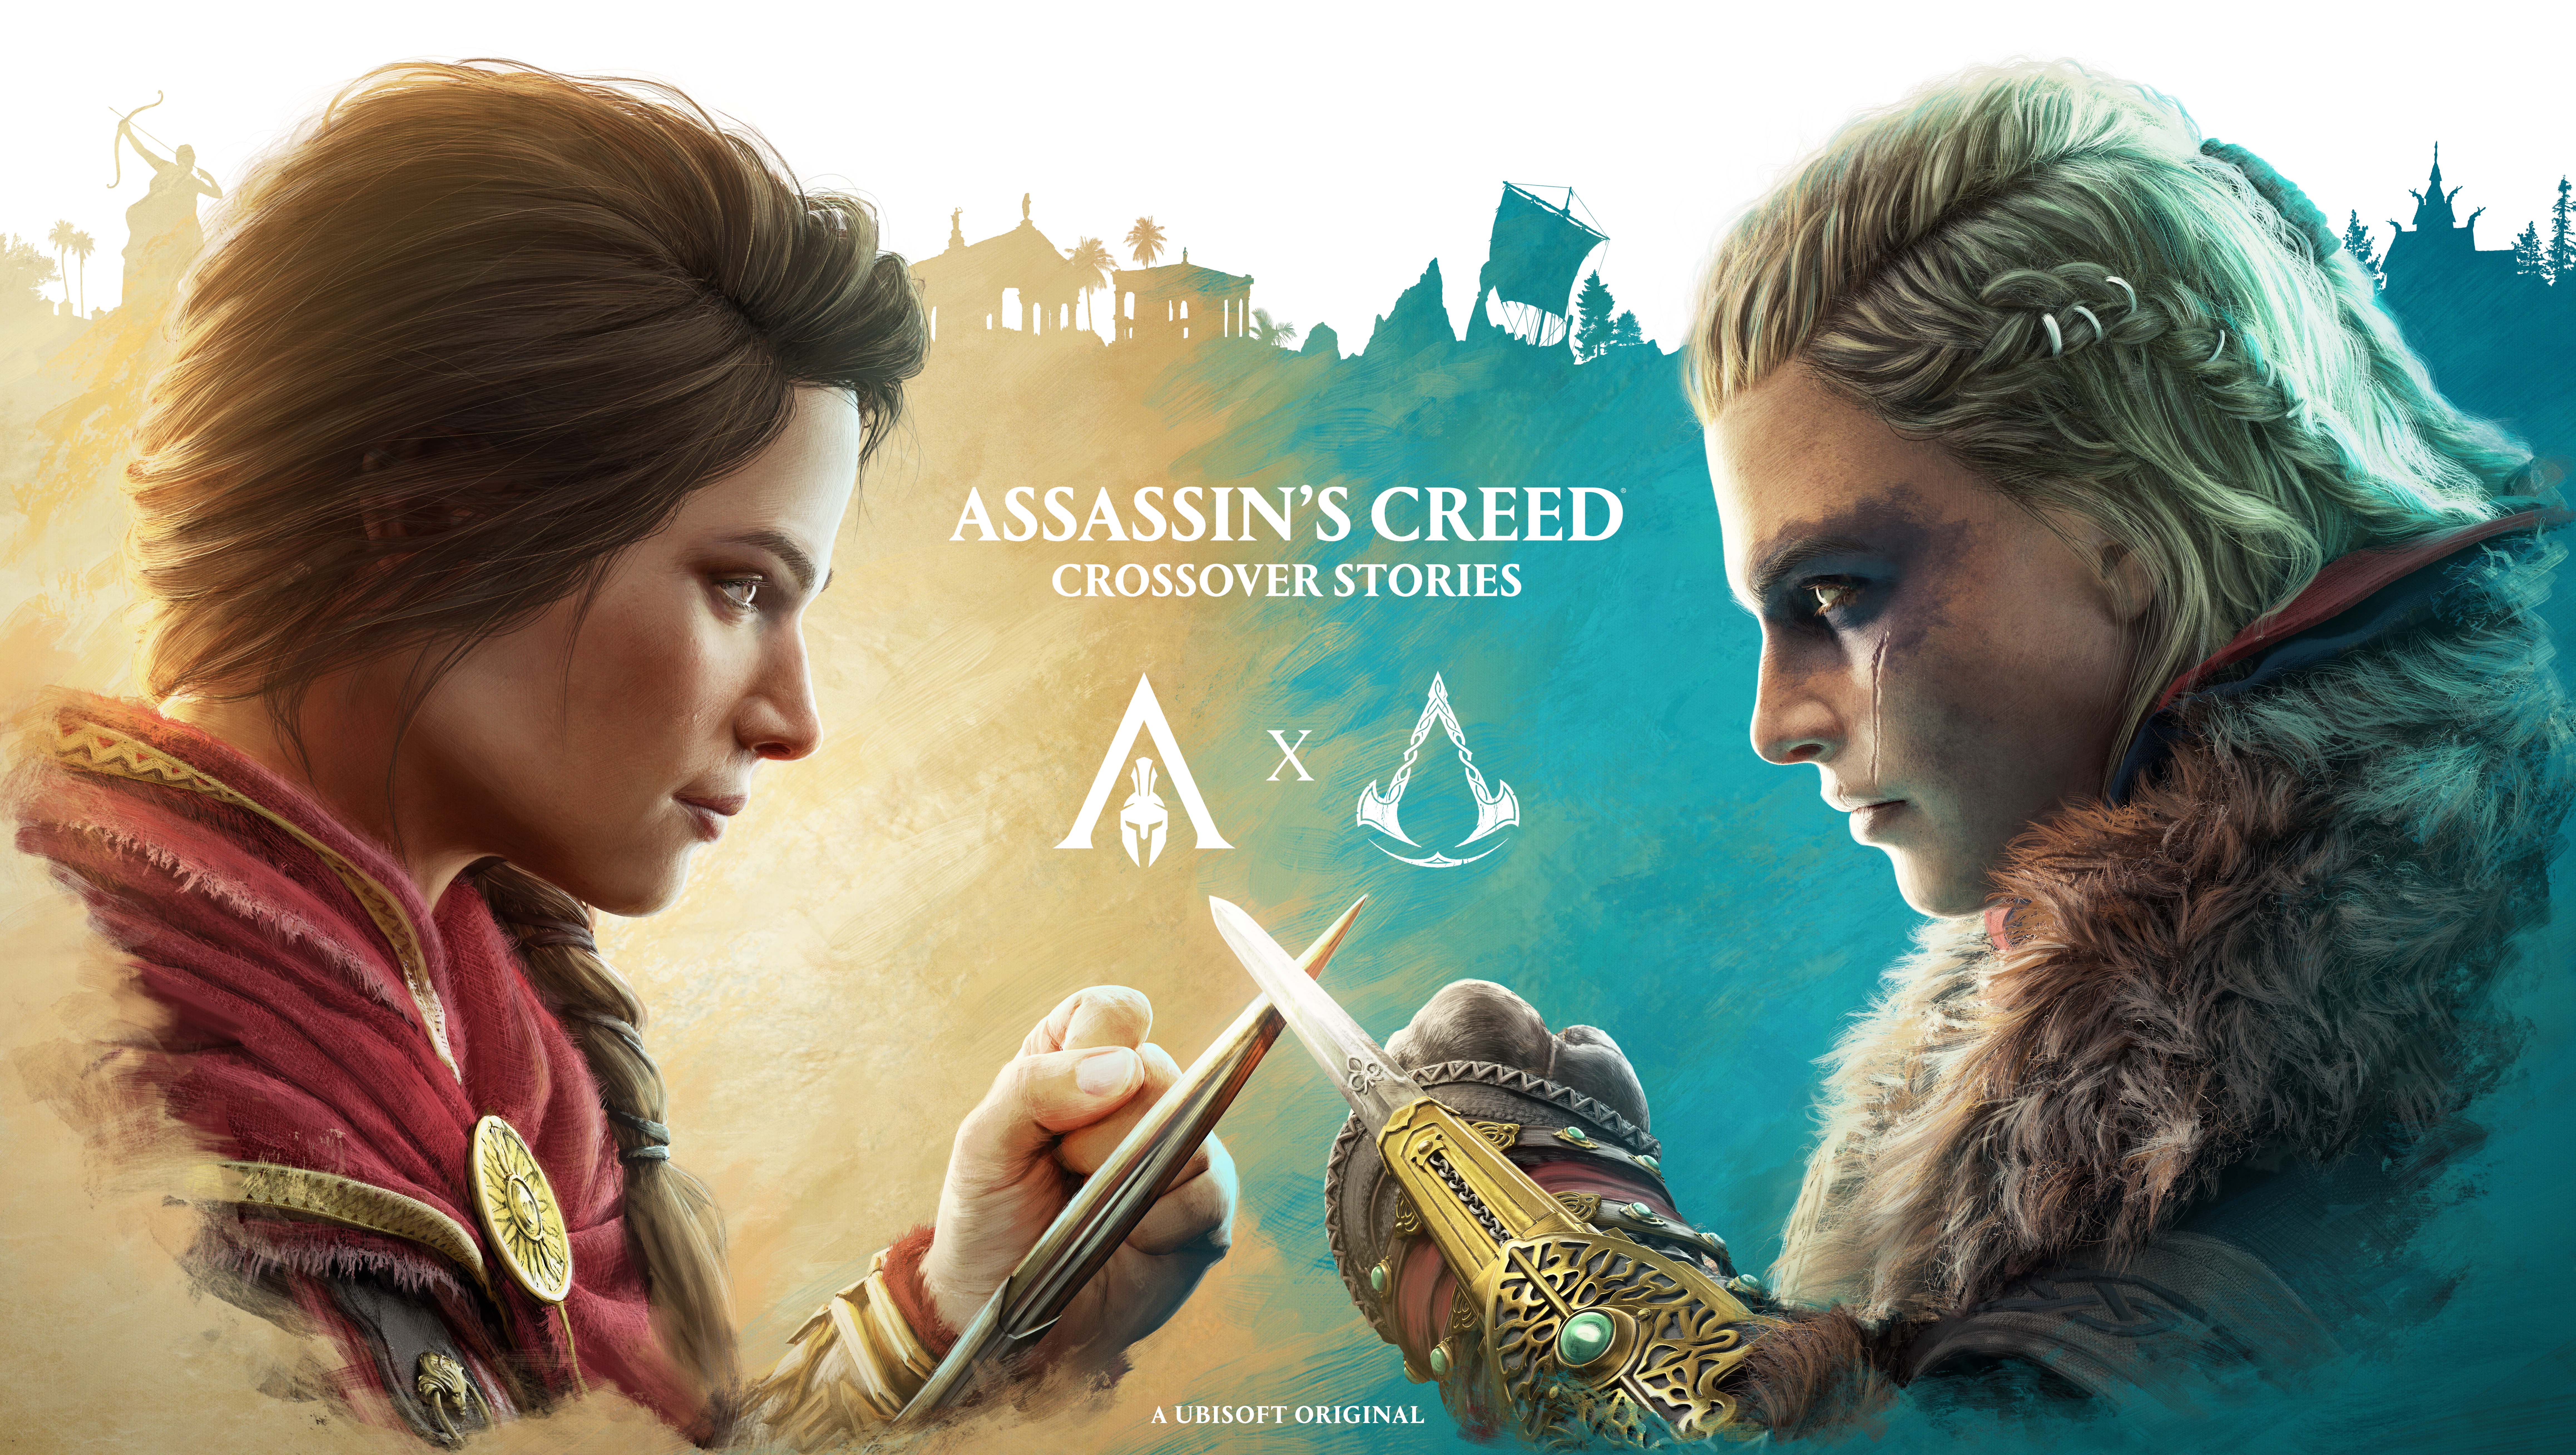 assassin's creed: crossover stories, video game, eivor (assassin's creed), kassandra (assassin's creed), assassin's creed